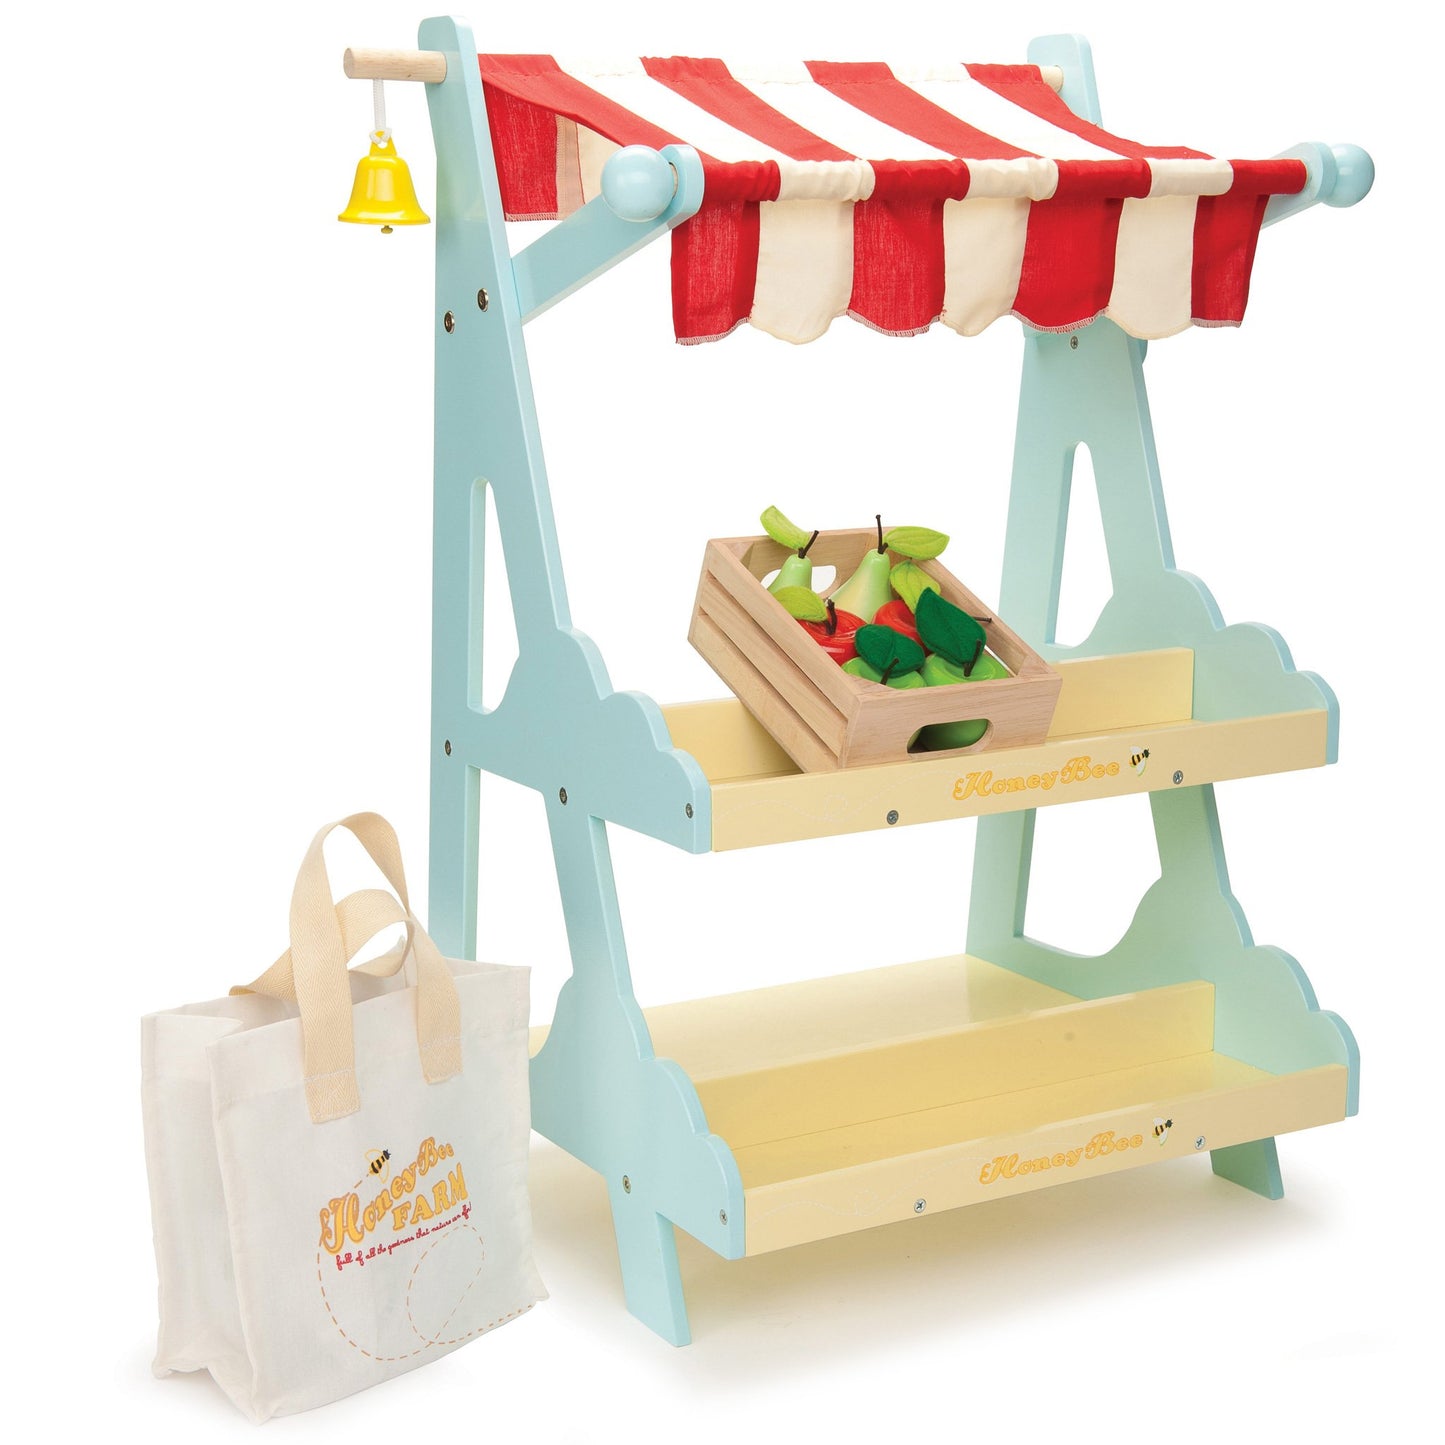 Le Toy Van - Honeybee Market with Shopping Bag and Crate of Fruit